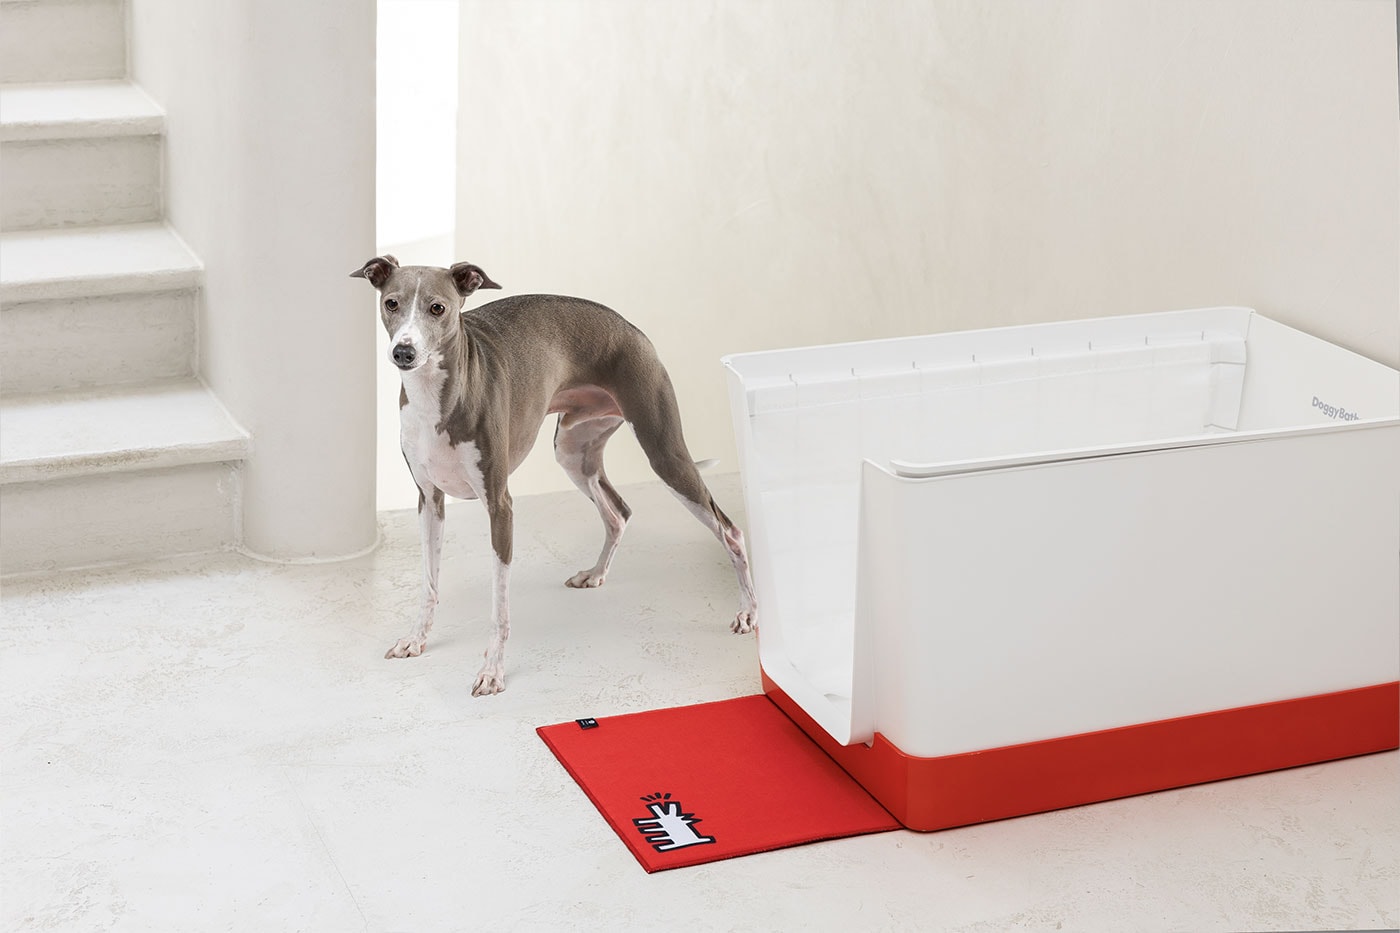 Doggy Bathroom's Elevated Litter Box Pays Homage to the Great Keith Haring